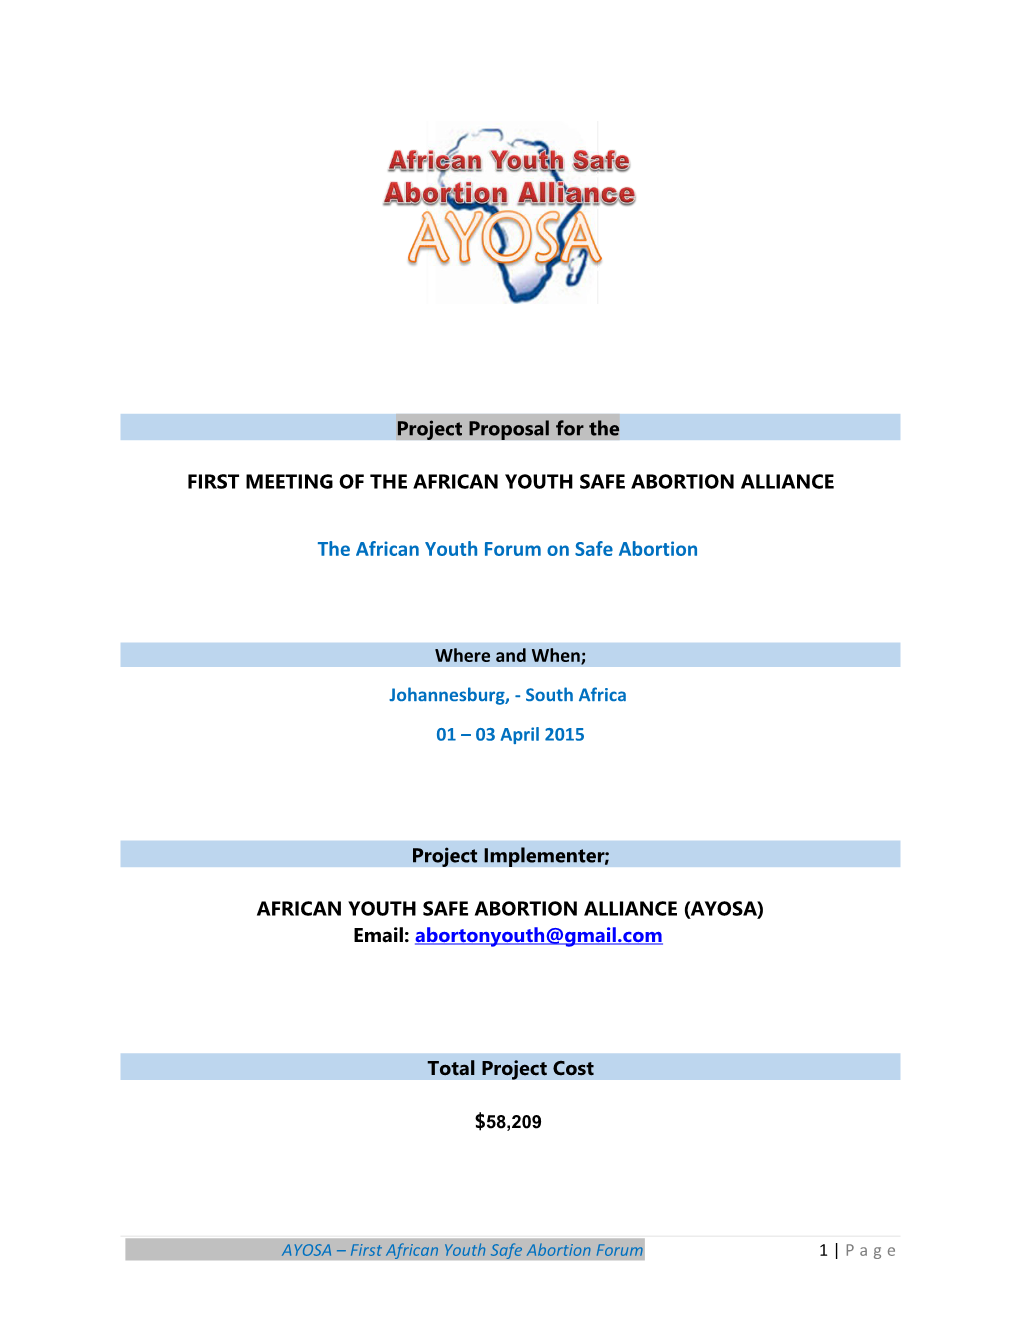 First Meeting of the African Youth Safe Abortion Alliance